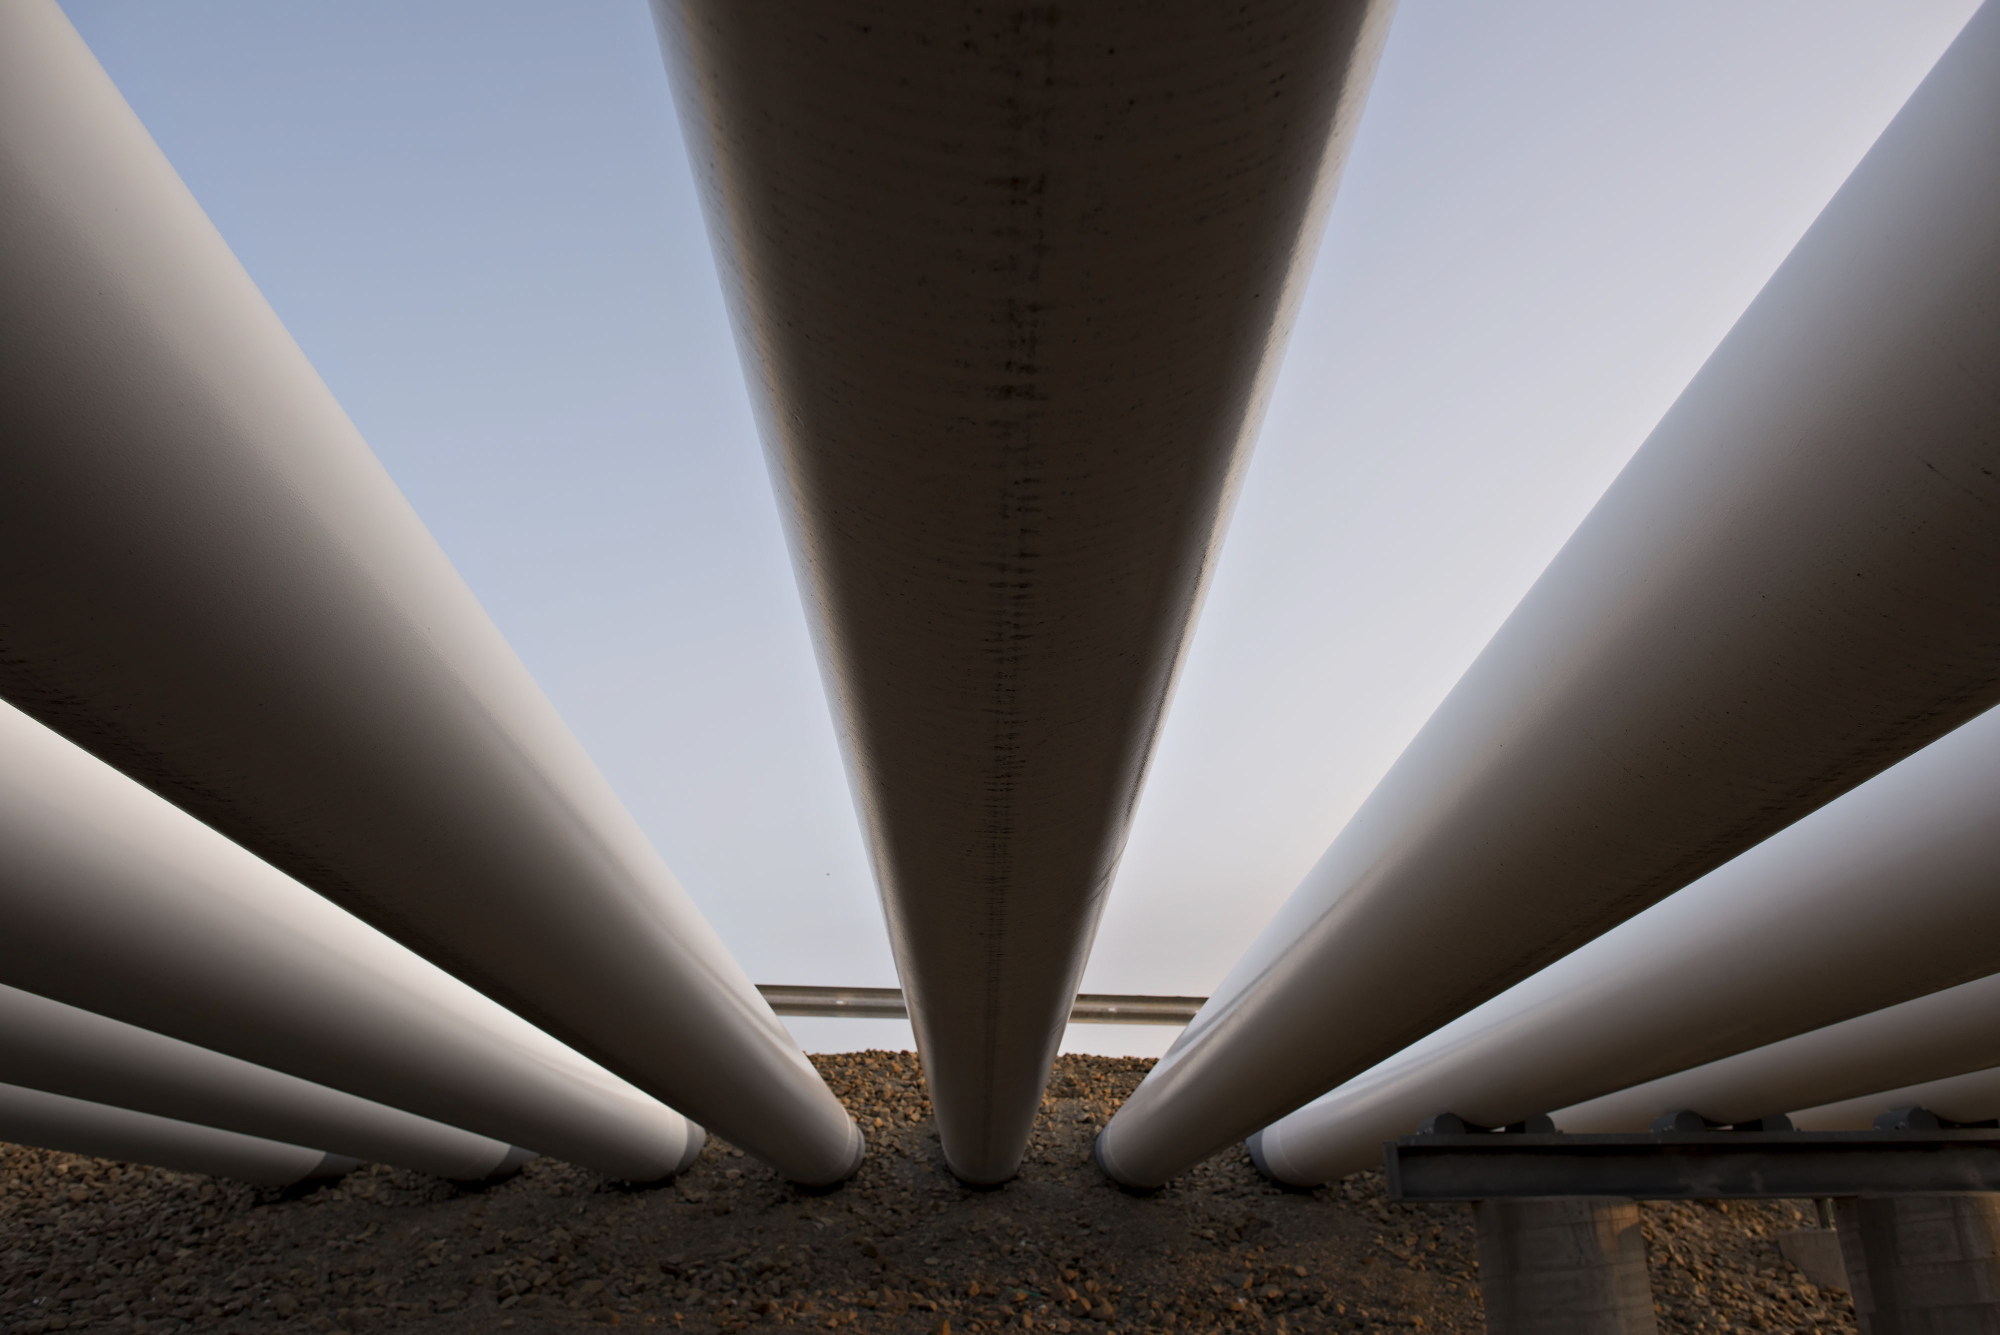 Oil pipes run into the ground at the Enbridge Inc. Cushing storage terminal in Cushing, Oklahoma, U.S., on&nbsp;March 25, 2015.&nbsp;